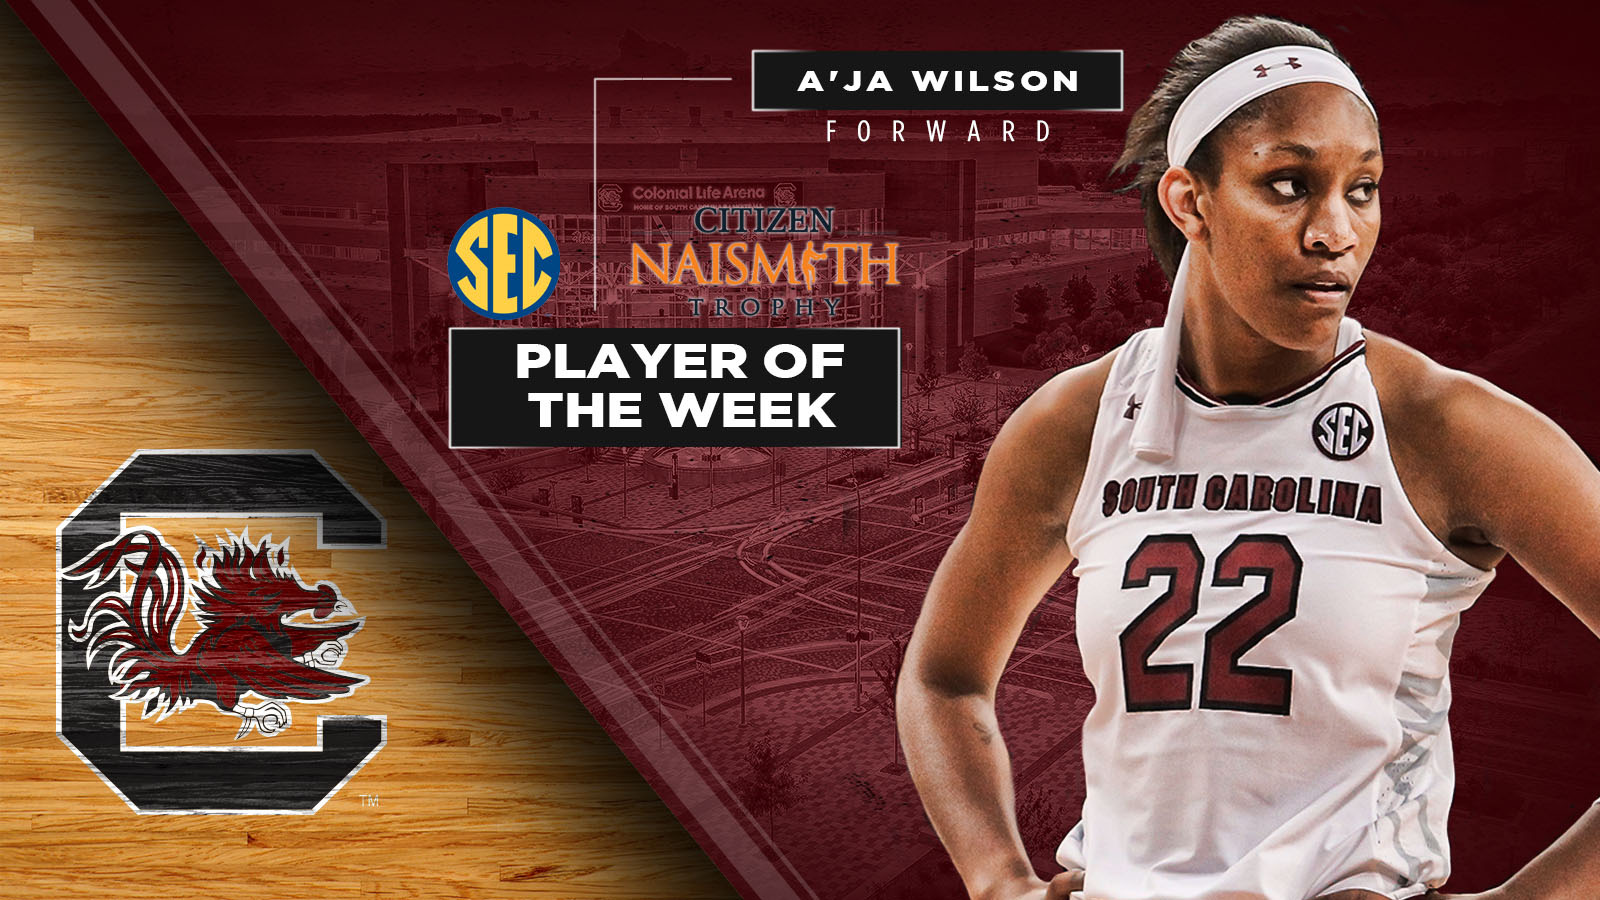 Wilson Named Citizen Naismith and SEC Player of the Week